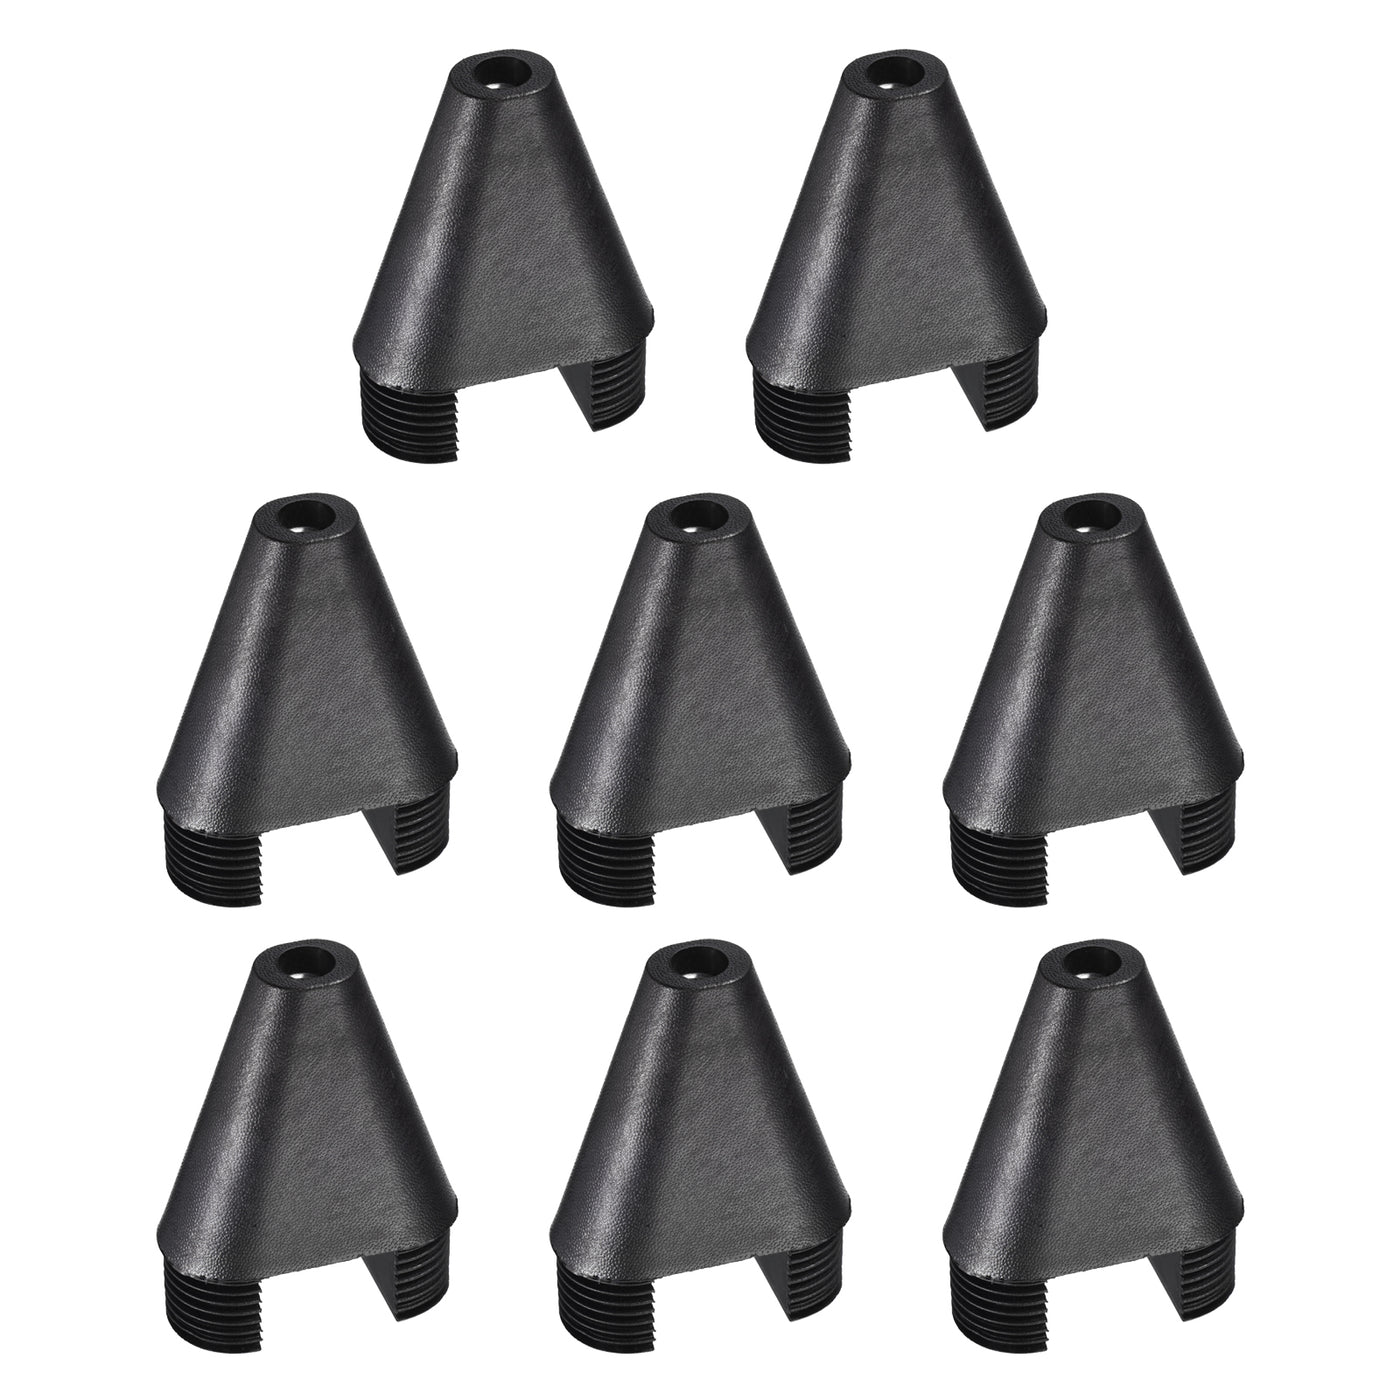 uxcell Uxcell 8Pcs 2.36"x1.18" Caster Insert with Thread, Oval M8 Thread for Furniture